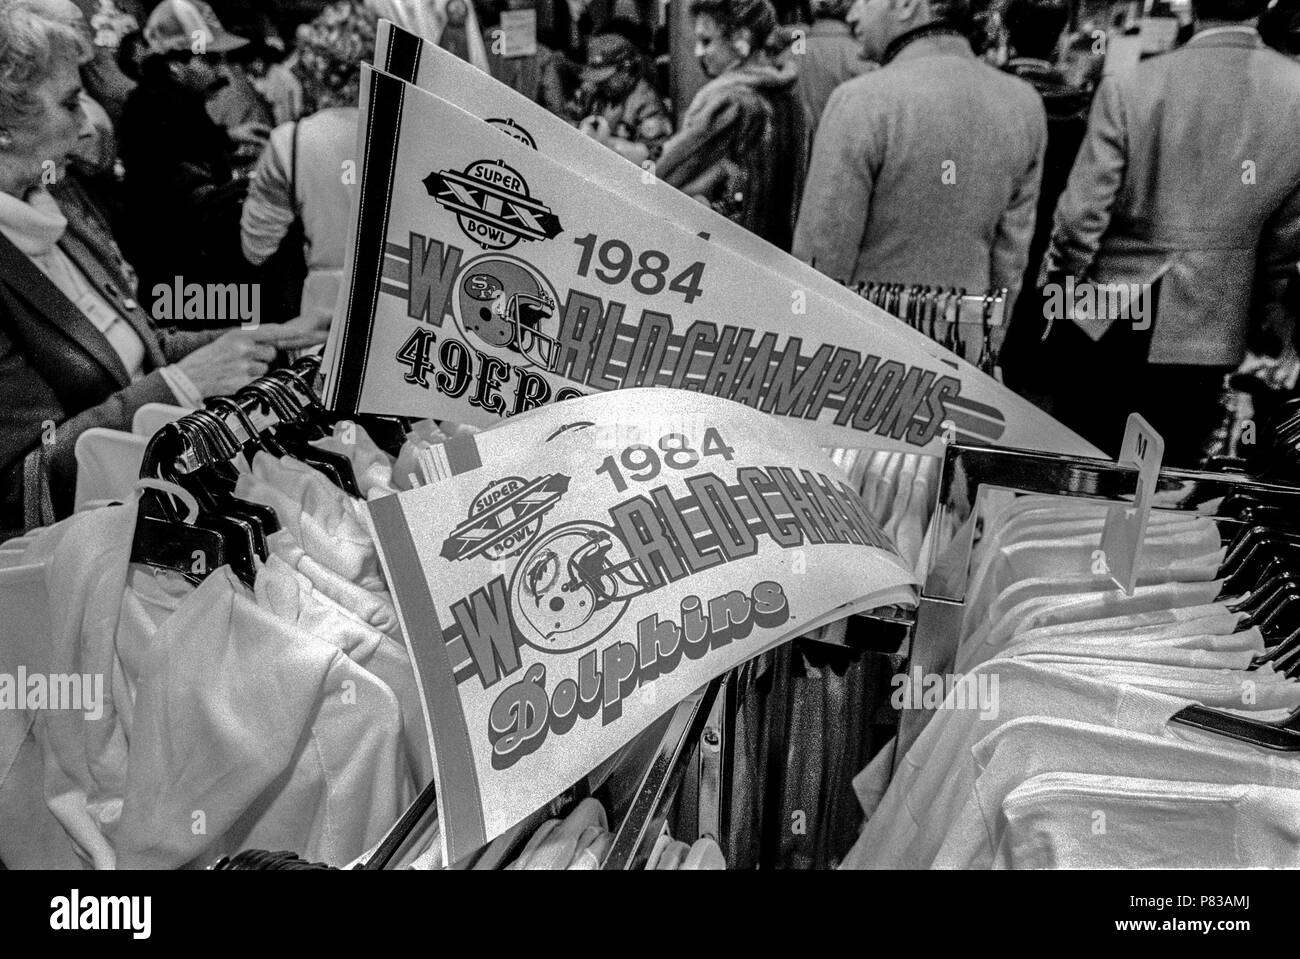 Stanford, California, USA. 20th Jan, 1985. Pennants for sale, for whichever team wins, at souvenir store near the Super Bowl XIX tailgate on the Stanford University campus. The San Francisco 49ers defeated the Miami Dolphins 38-16 on Sunday, January 20, 1985. Credit: Al Golub/ZUMA Wire/Alamy Live News Stock Photo